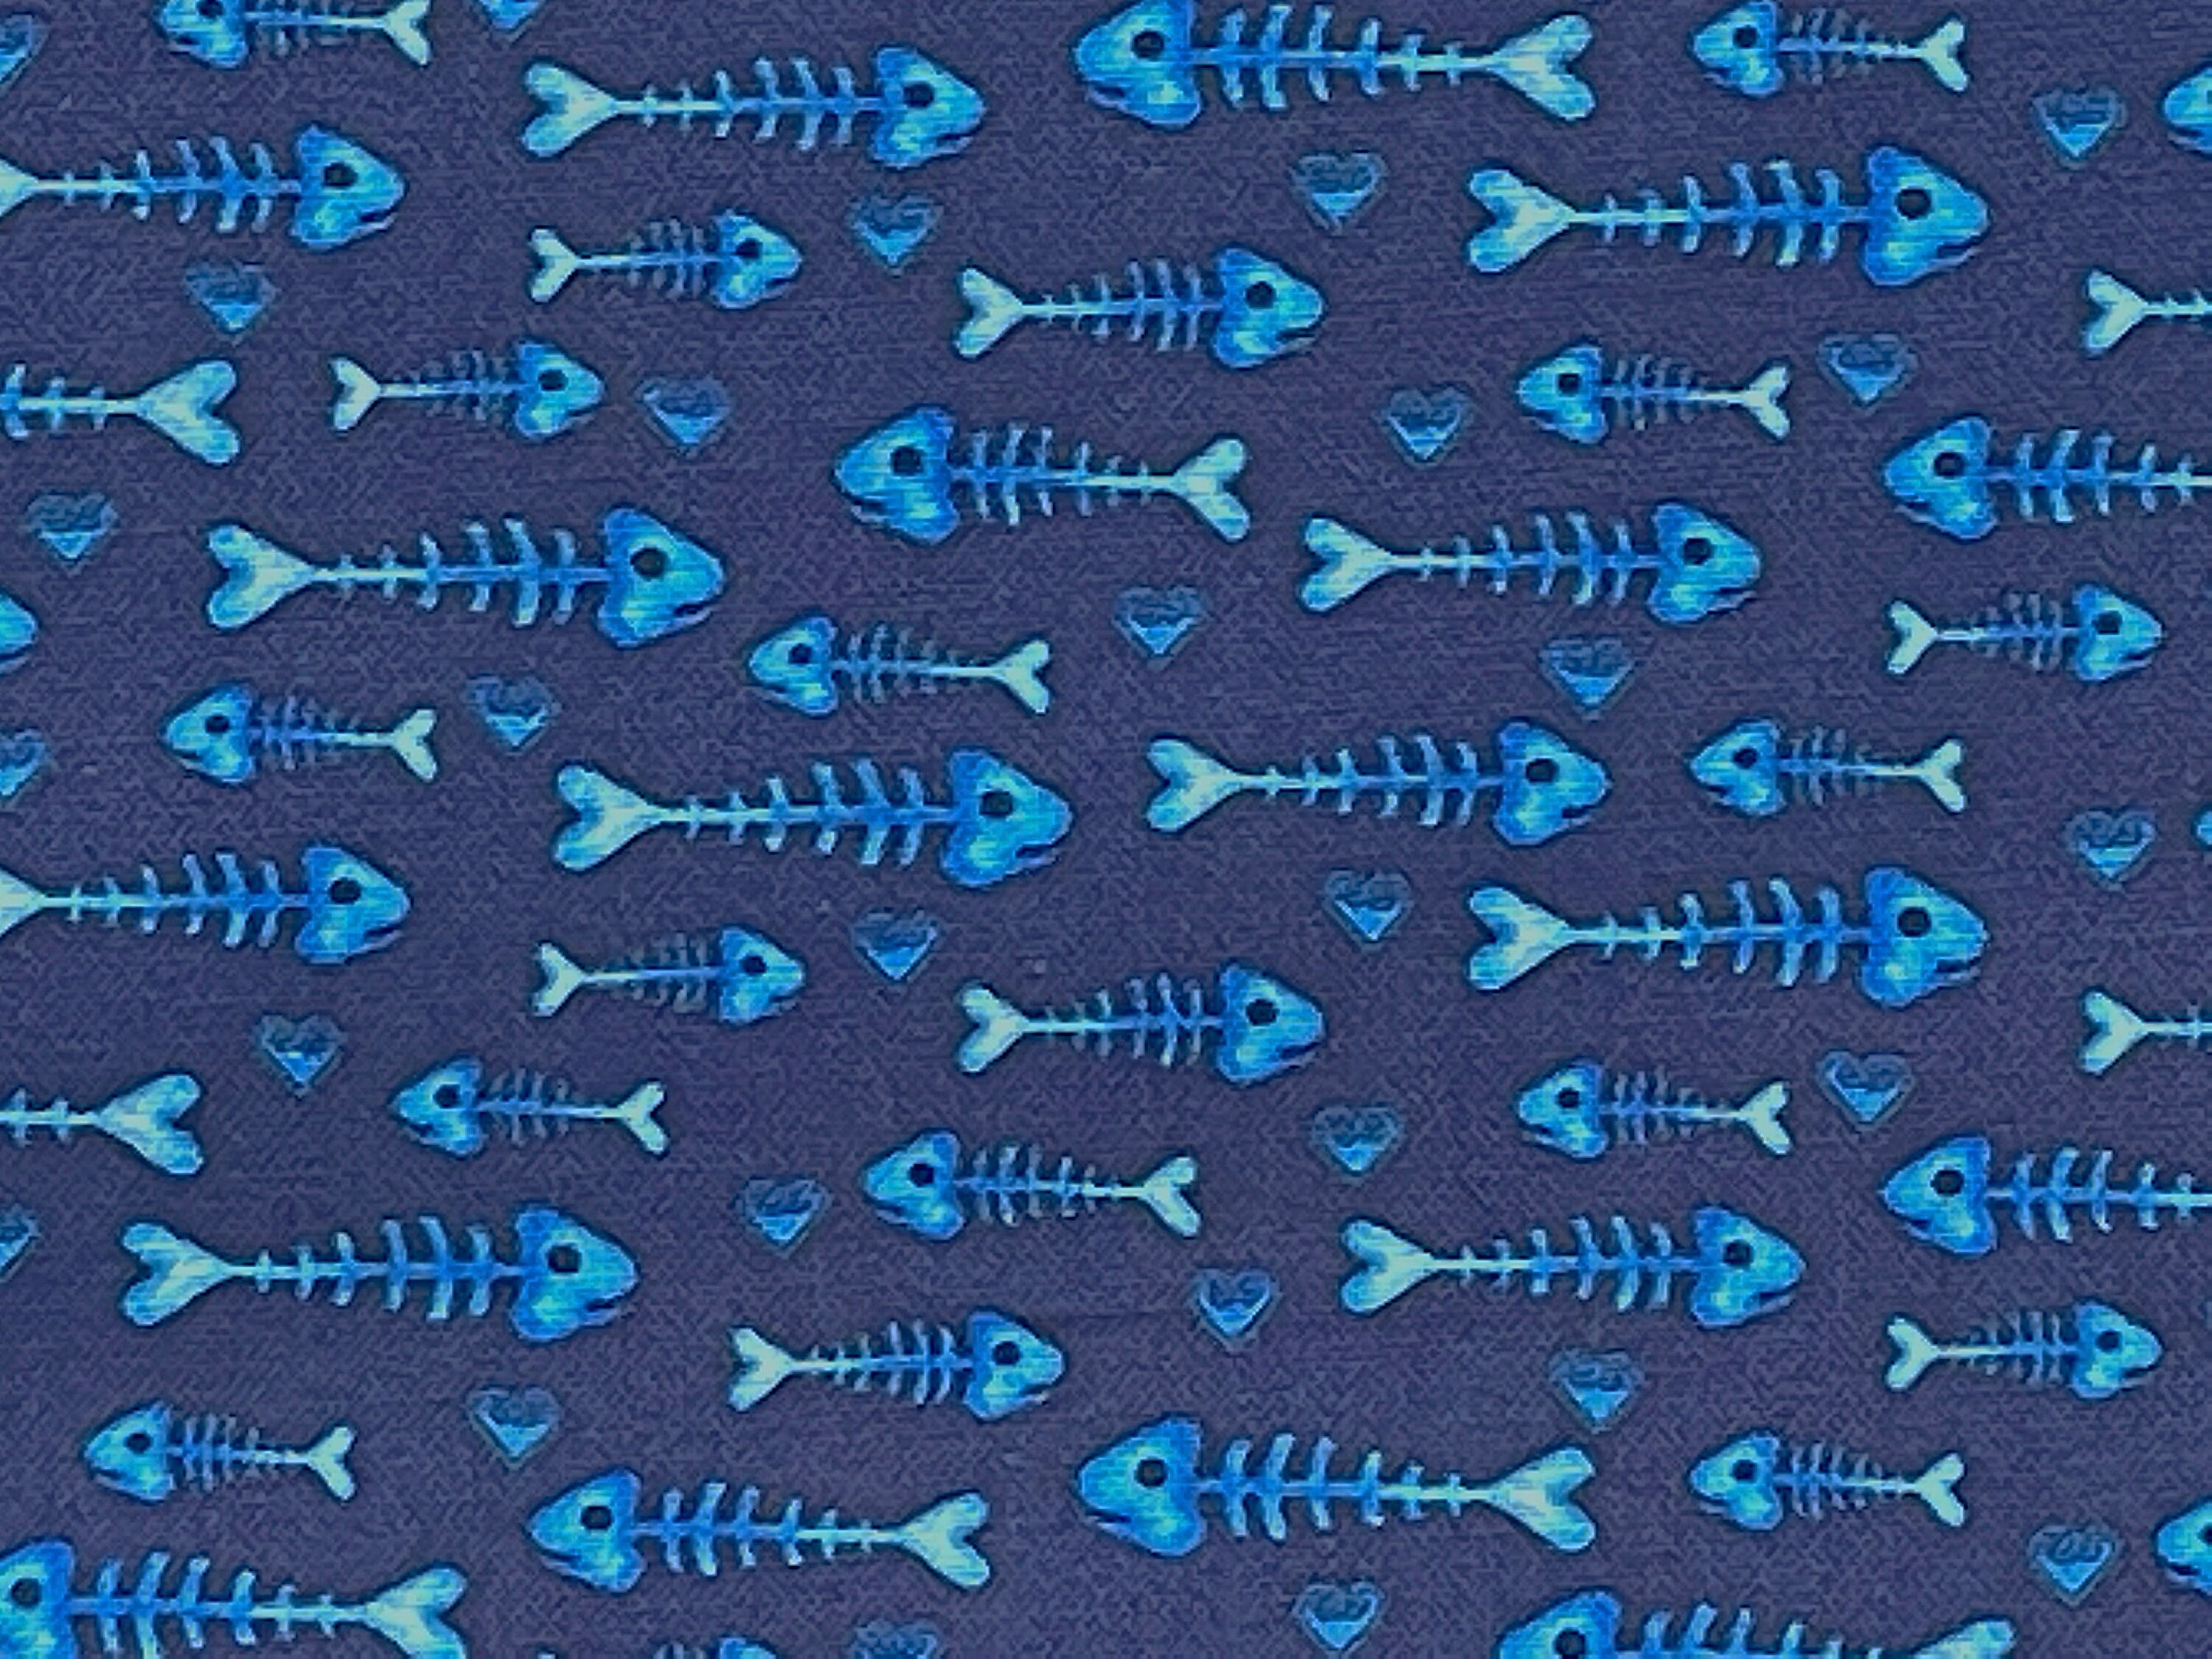 This blue fabric is covered with fish bones. This fabric is part of the Kitty City collection by Andi Metz.